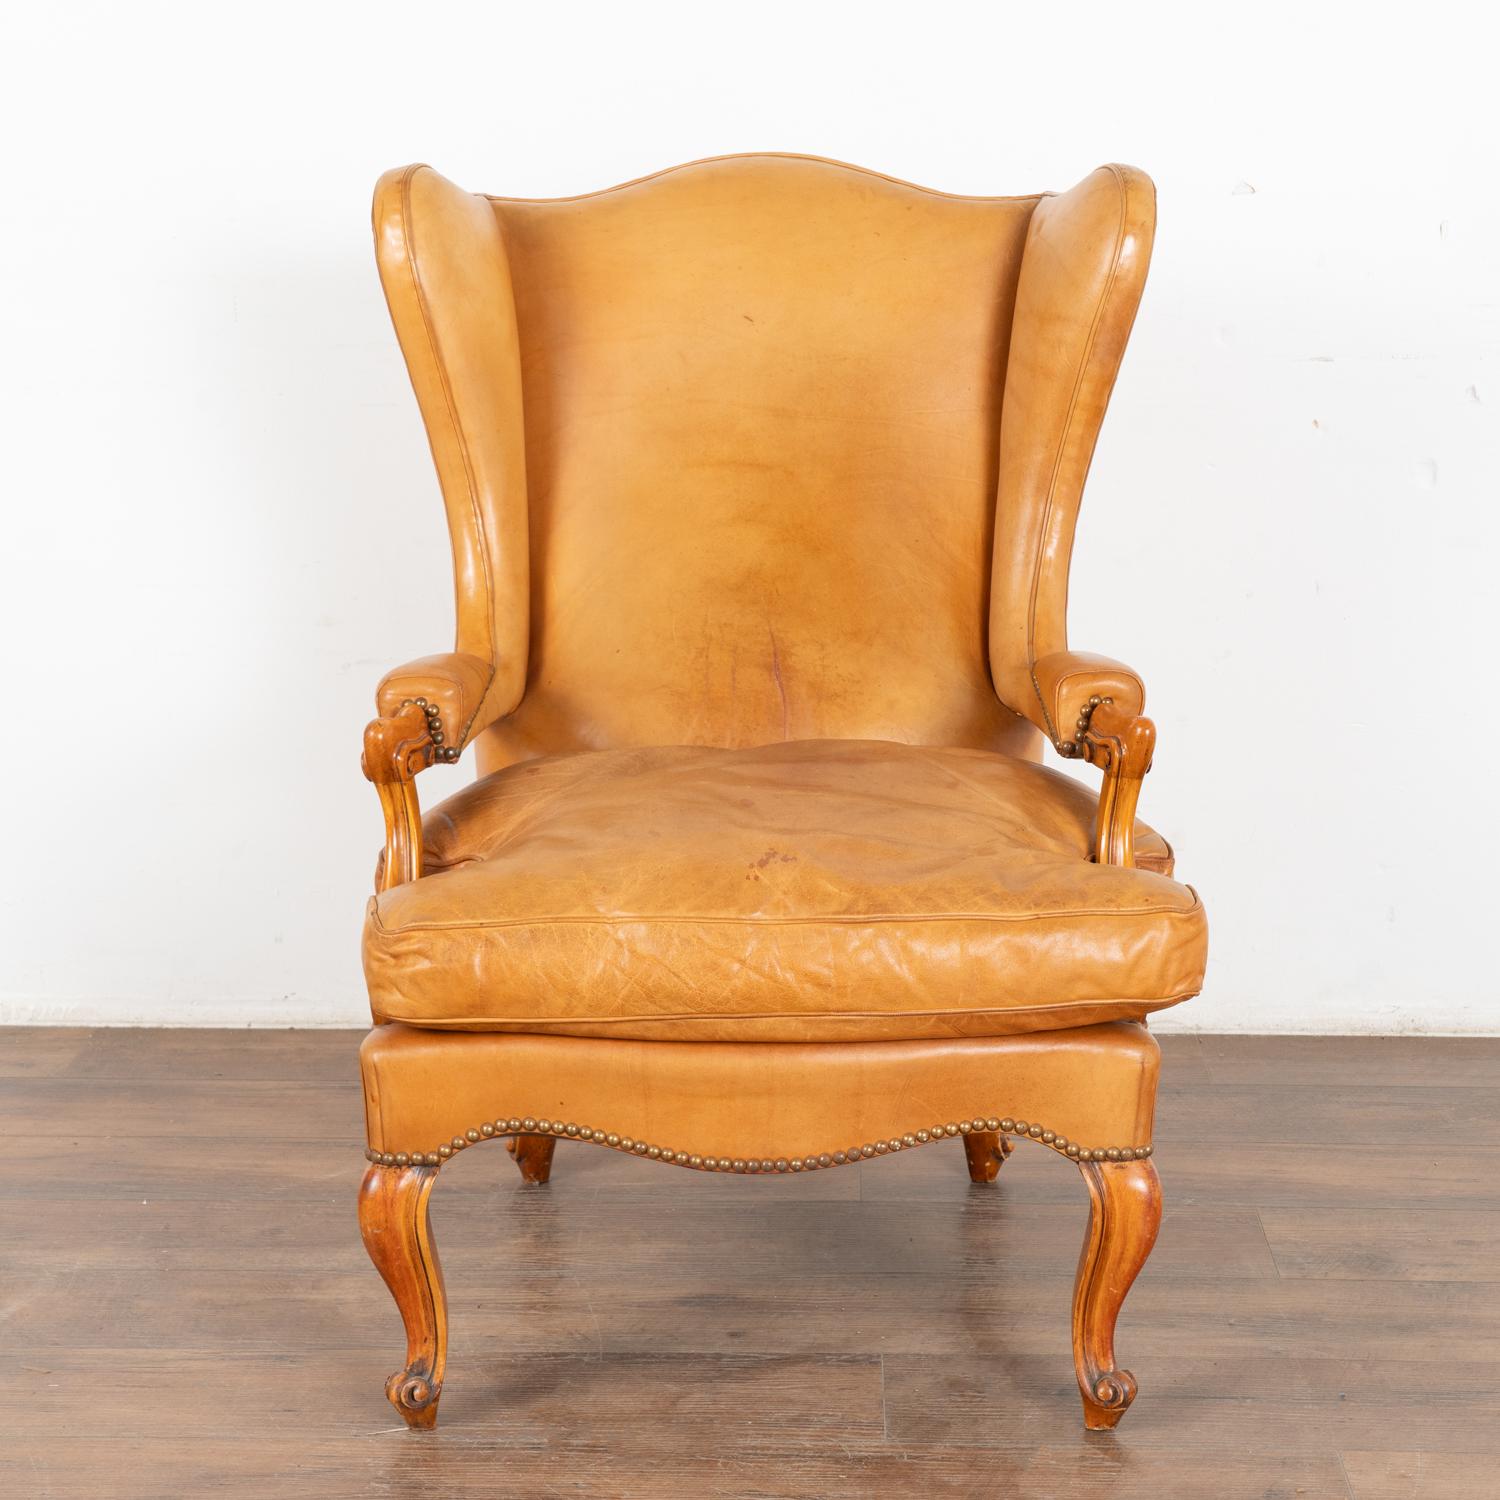 Chesterfield Vintage Camel Colored Leather Wingback Armchair, Denmark circa 1940 For Sale